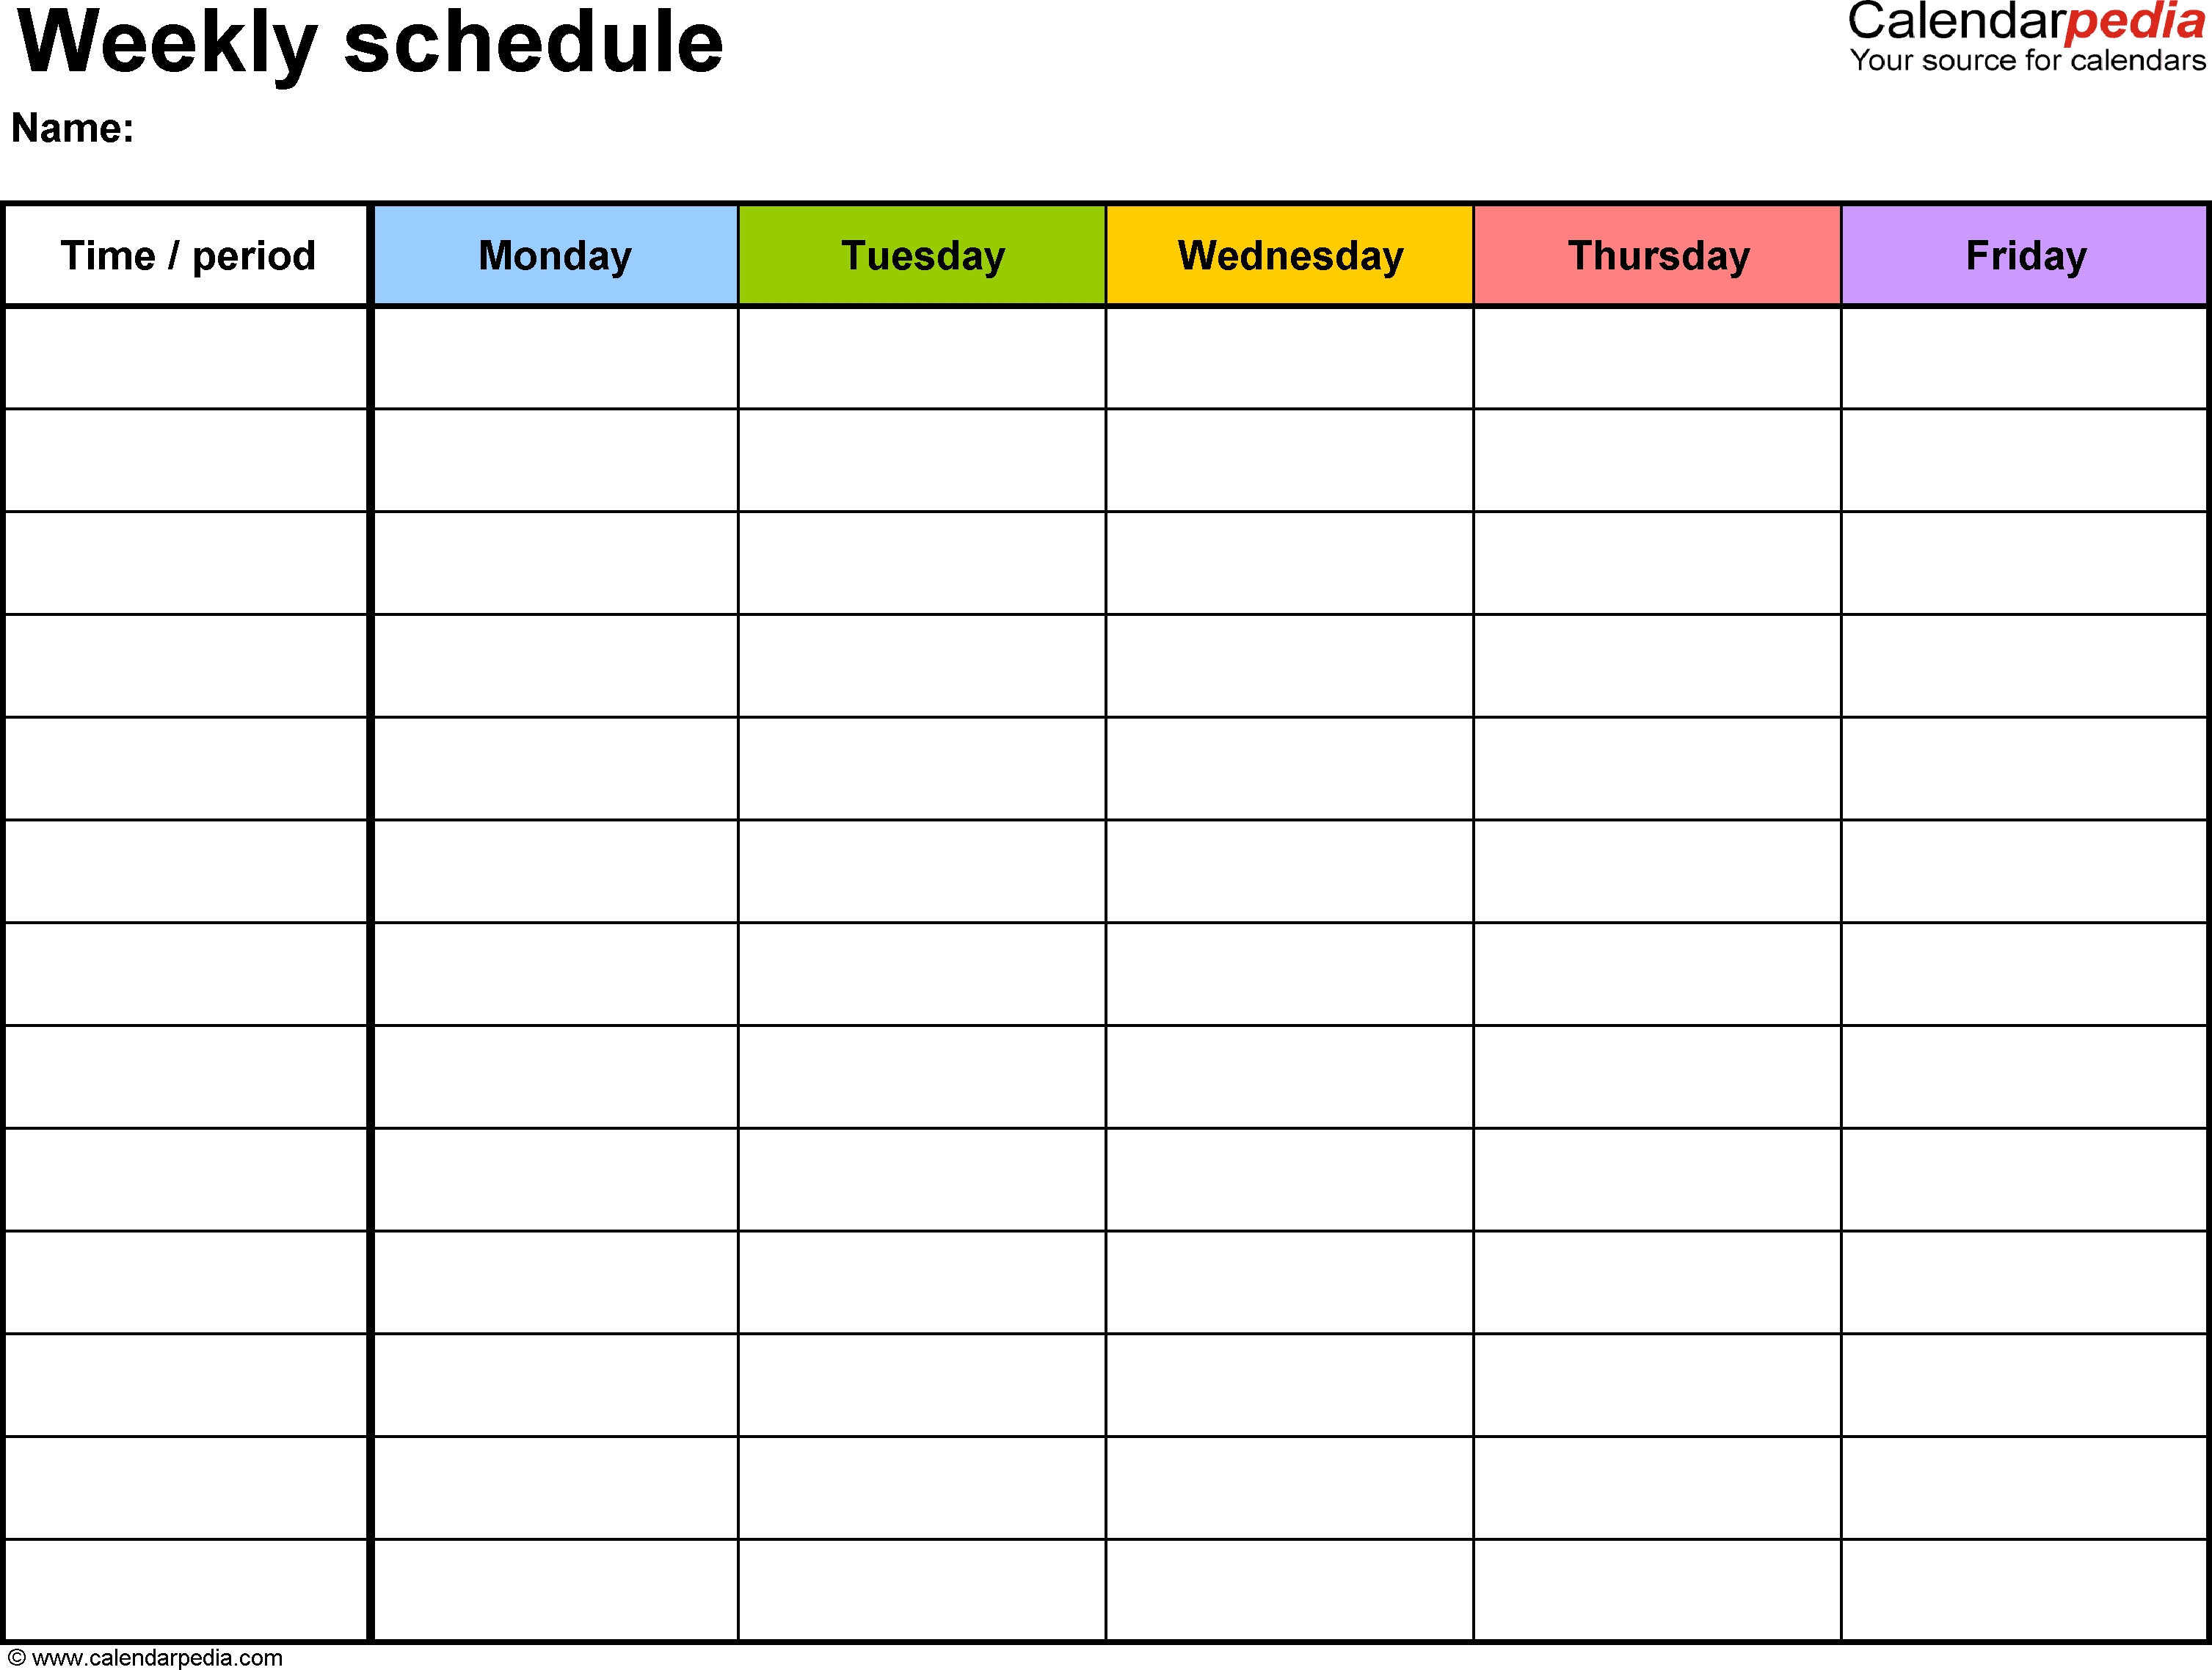 Free Weekly Schedule Templates For Word - 18 Templates intended for Blank Days Of The Week Calendar